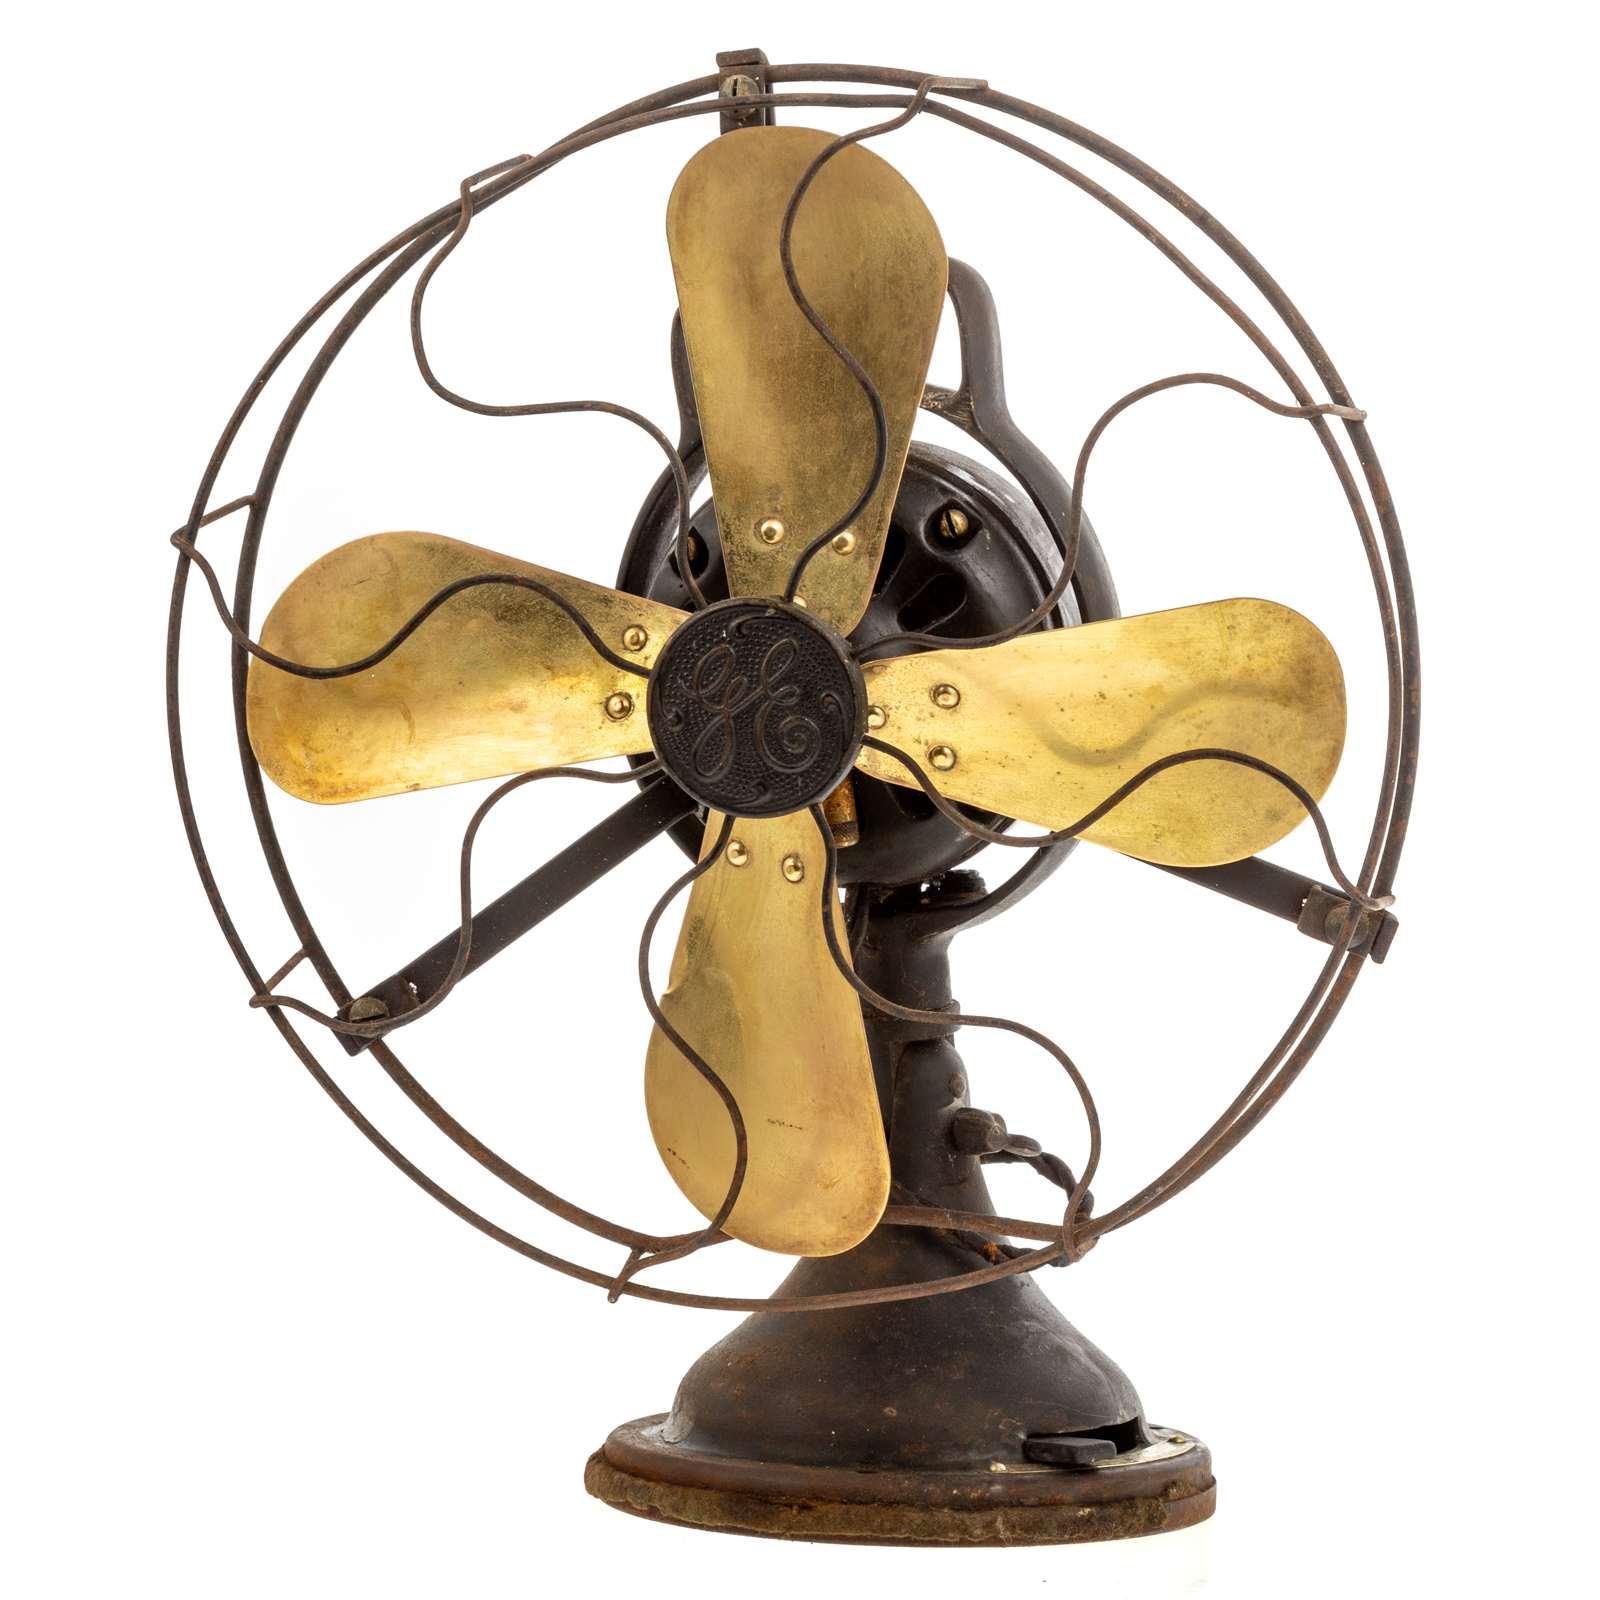 GENERAL ELECTRIC TABLE FAN Circa 3caf5a